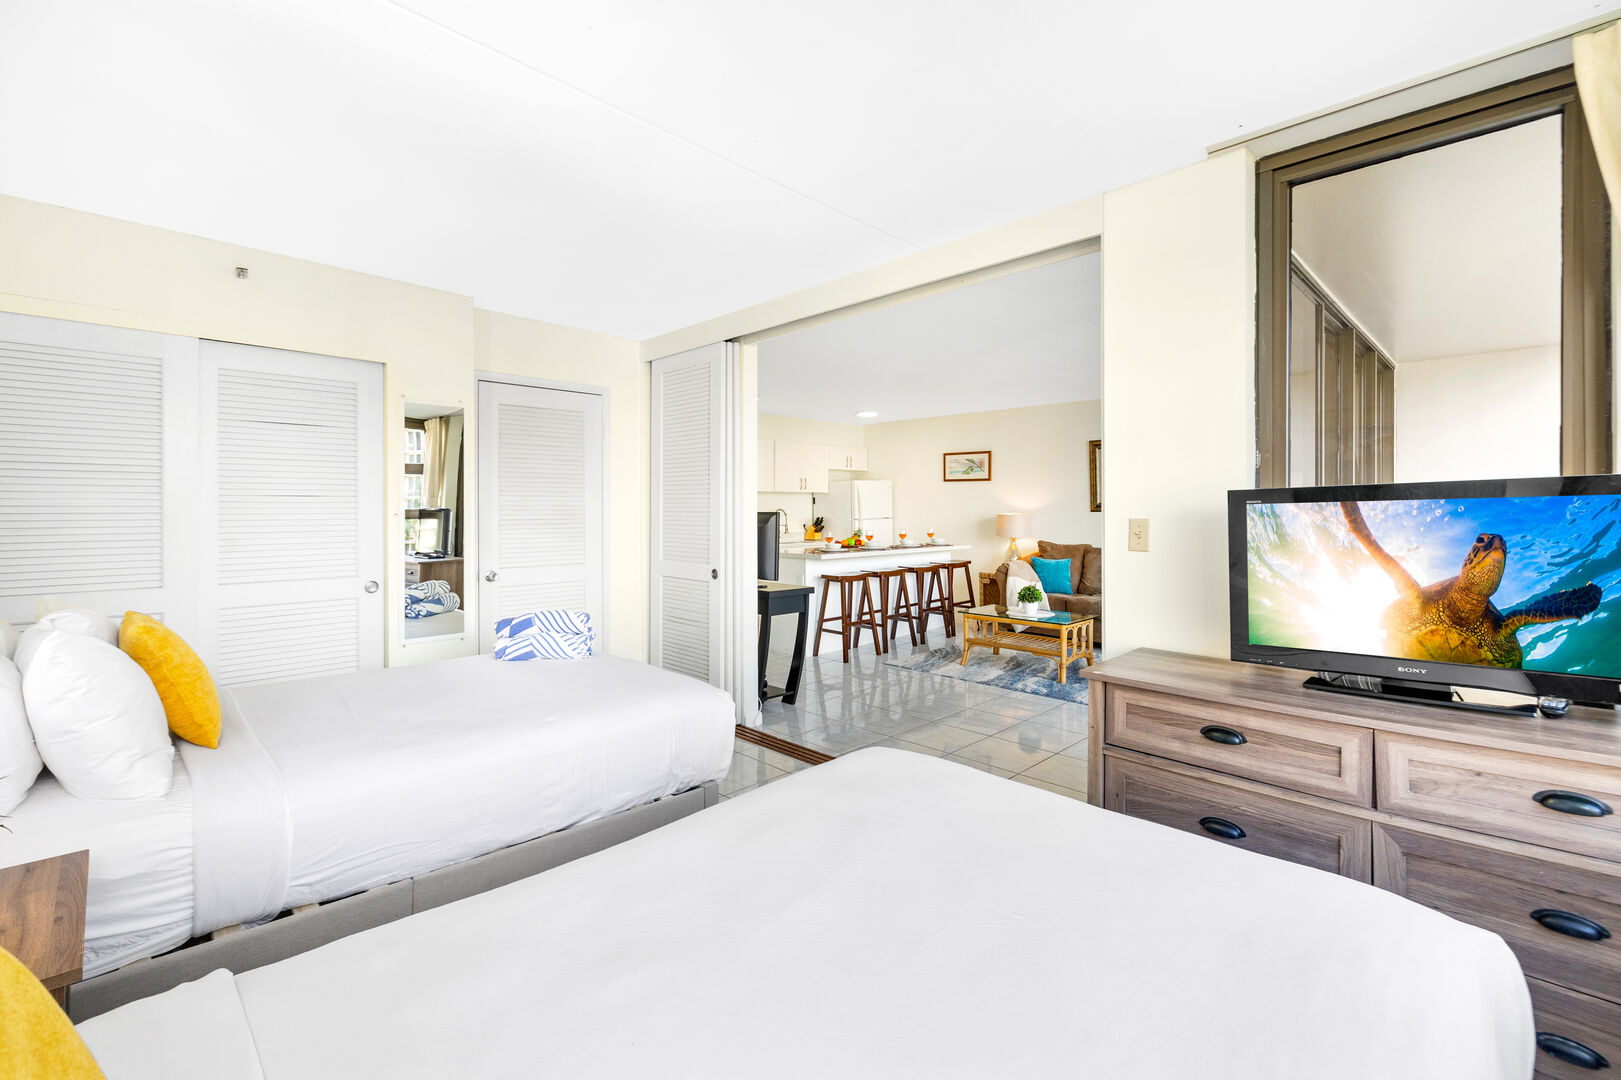 The bedroom features 2 full-size beds and a flat screen TV!